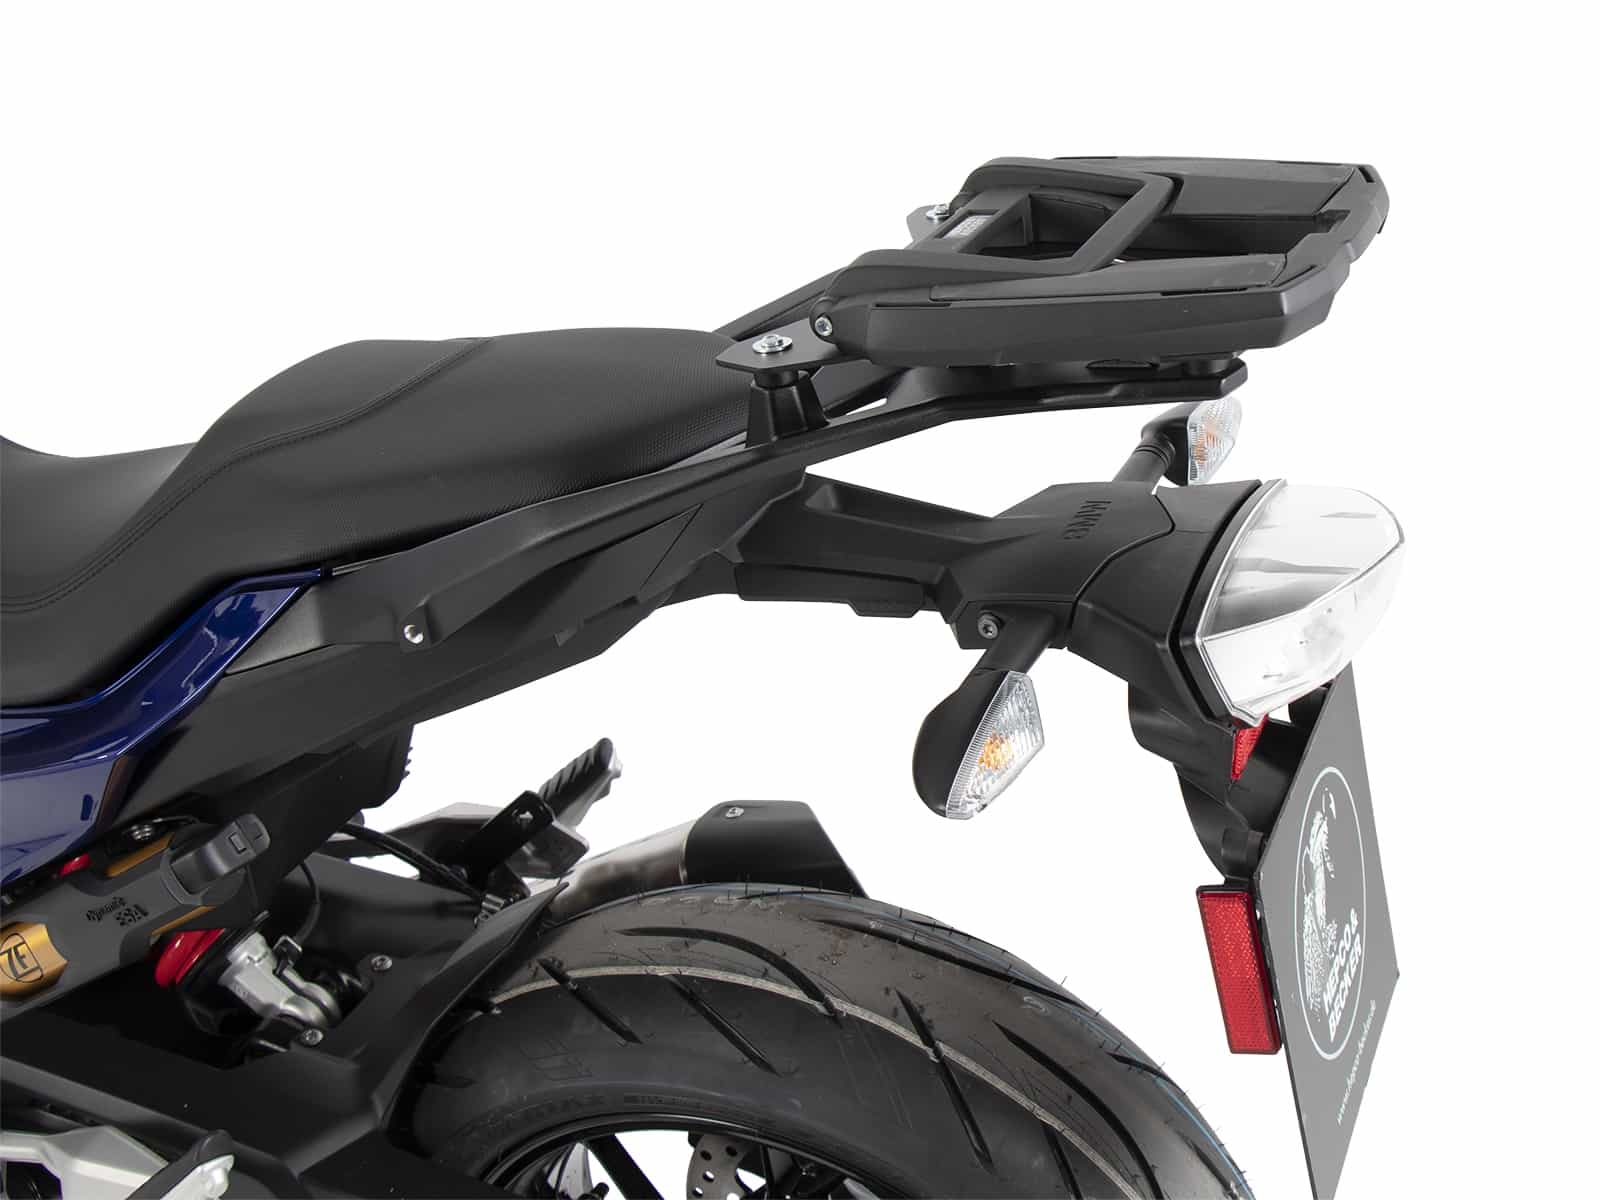 Easyrack topcasecarrier black for combination with original rear rack for BMW F 900 R (2020-)